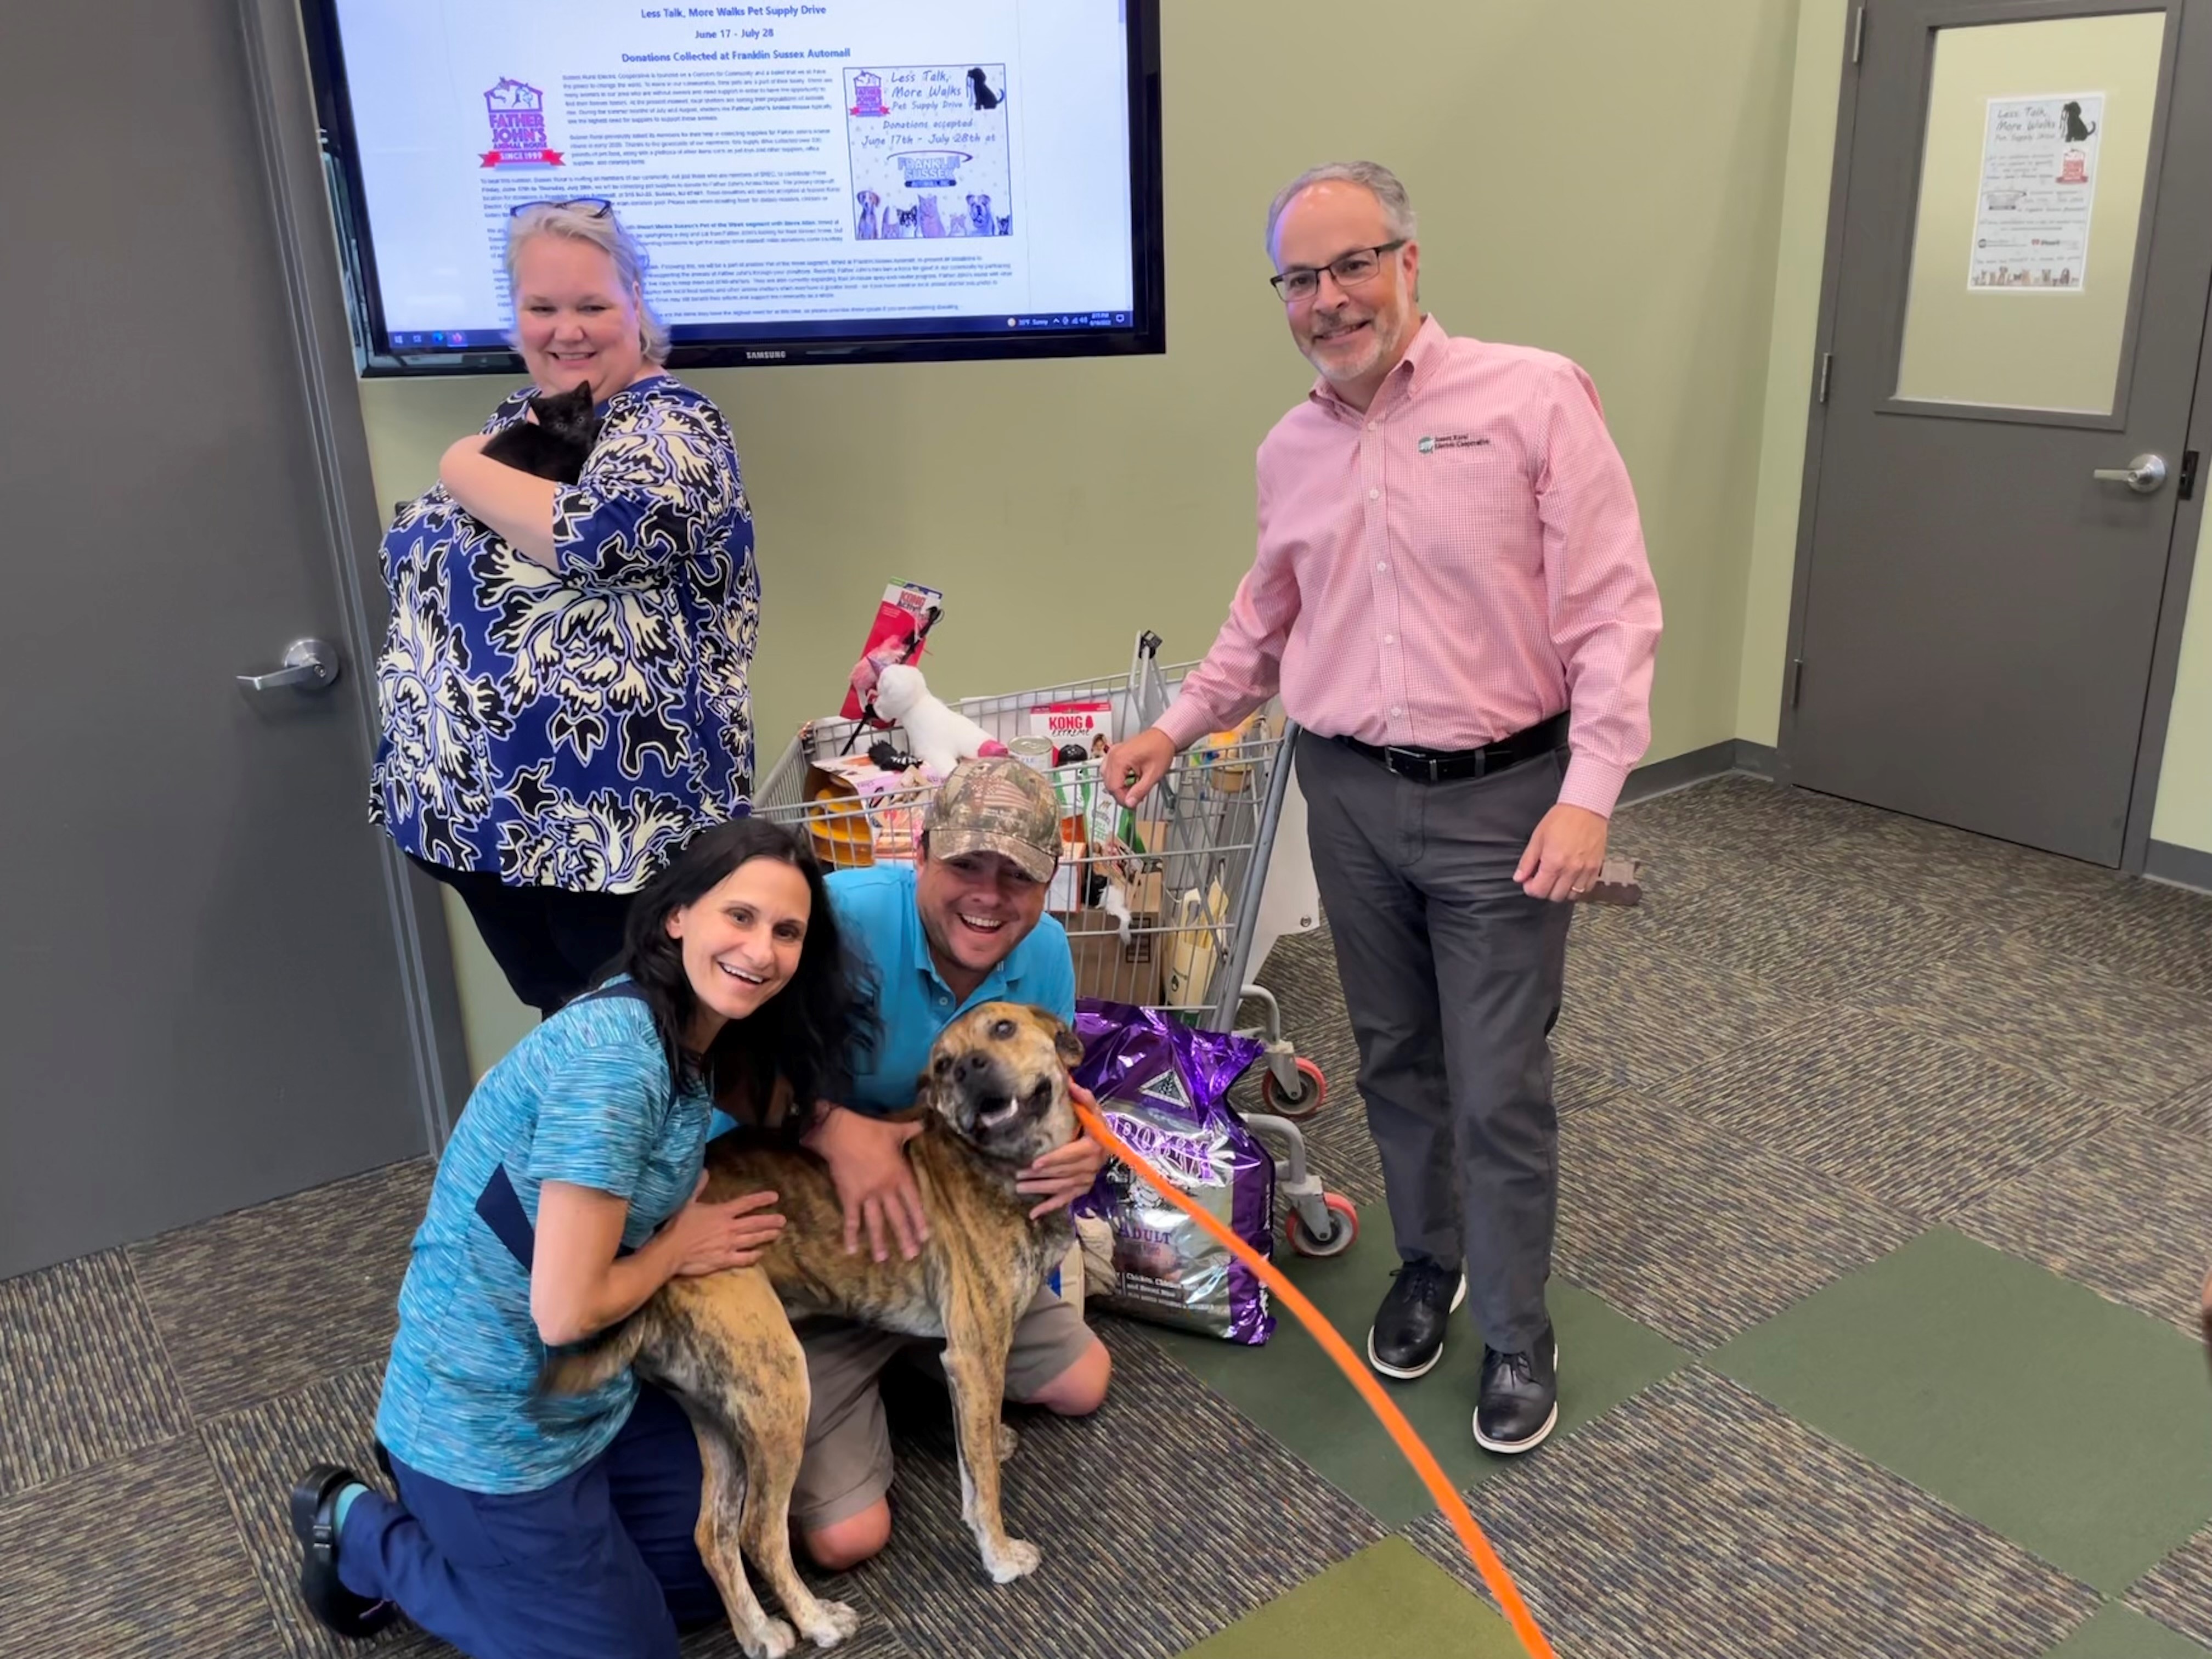 Photo of SREC staff, Steve Allan from 102.3 WSUS, and Dr. Karen Bullock posing with Sassy the kitten and Spanky the dog (both from Father John's Animal House) as part of a 6/16/22 Pet of the Week segment